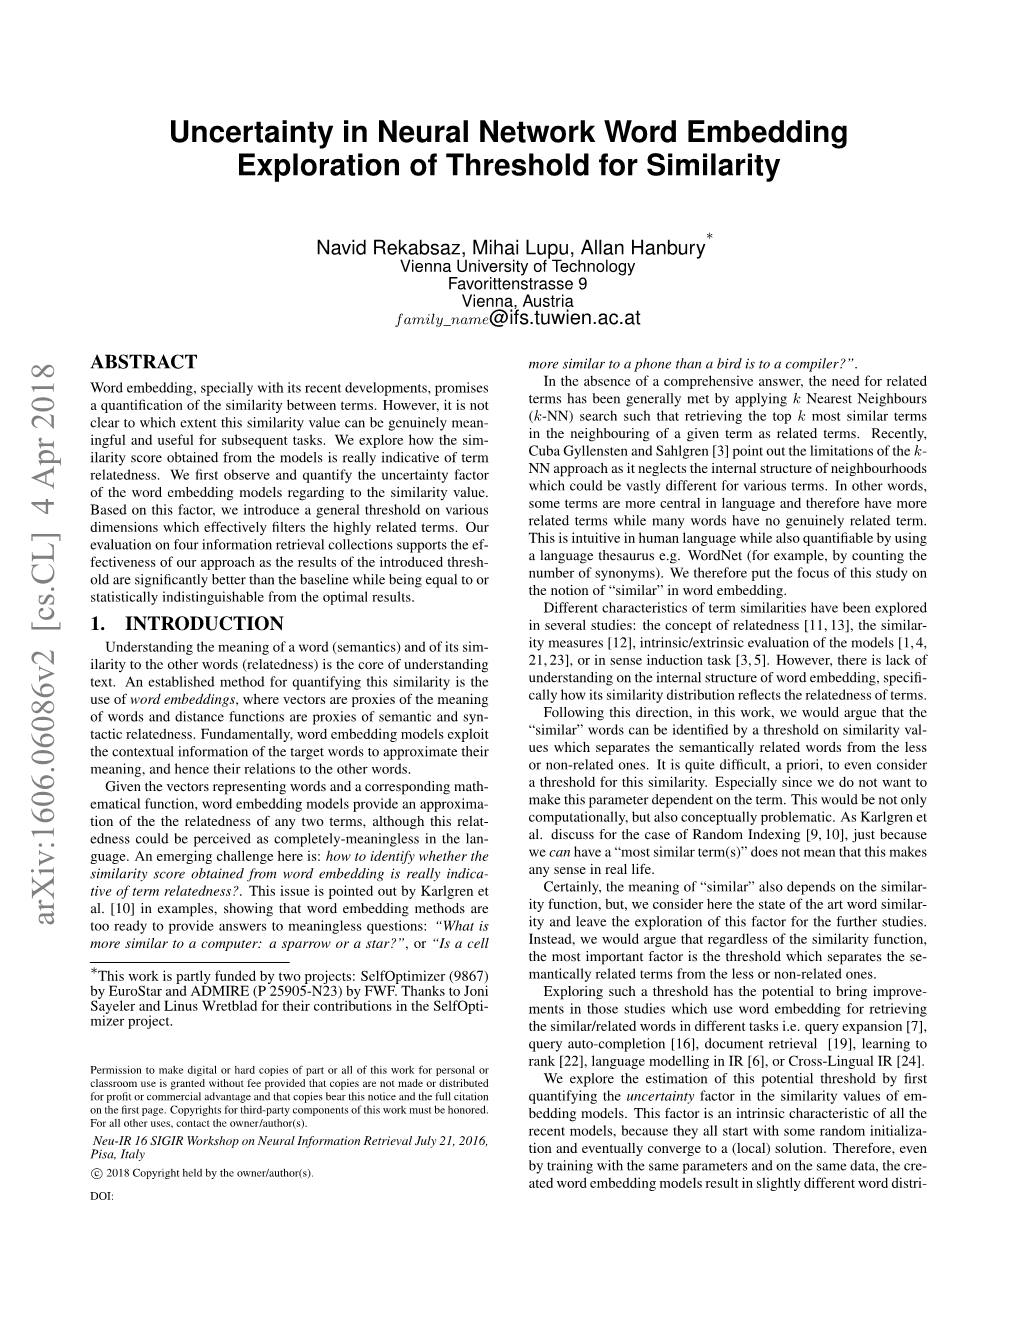 Uncertainty in Neural Network Word Embedding Exploration of Threshold for Similarity